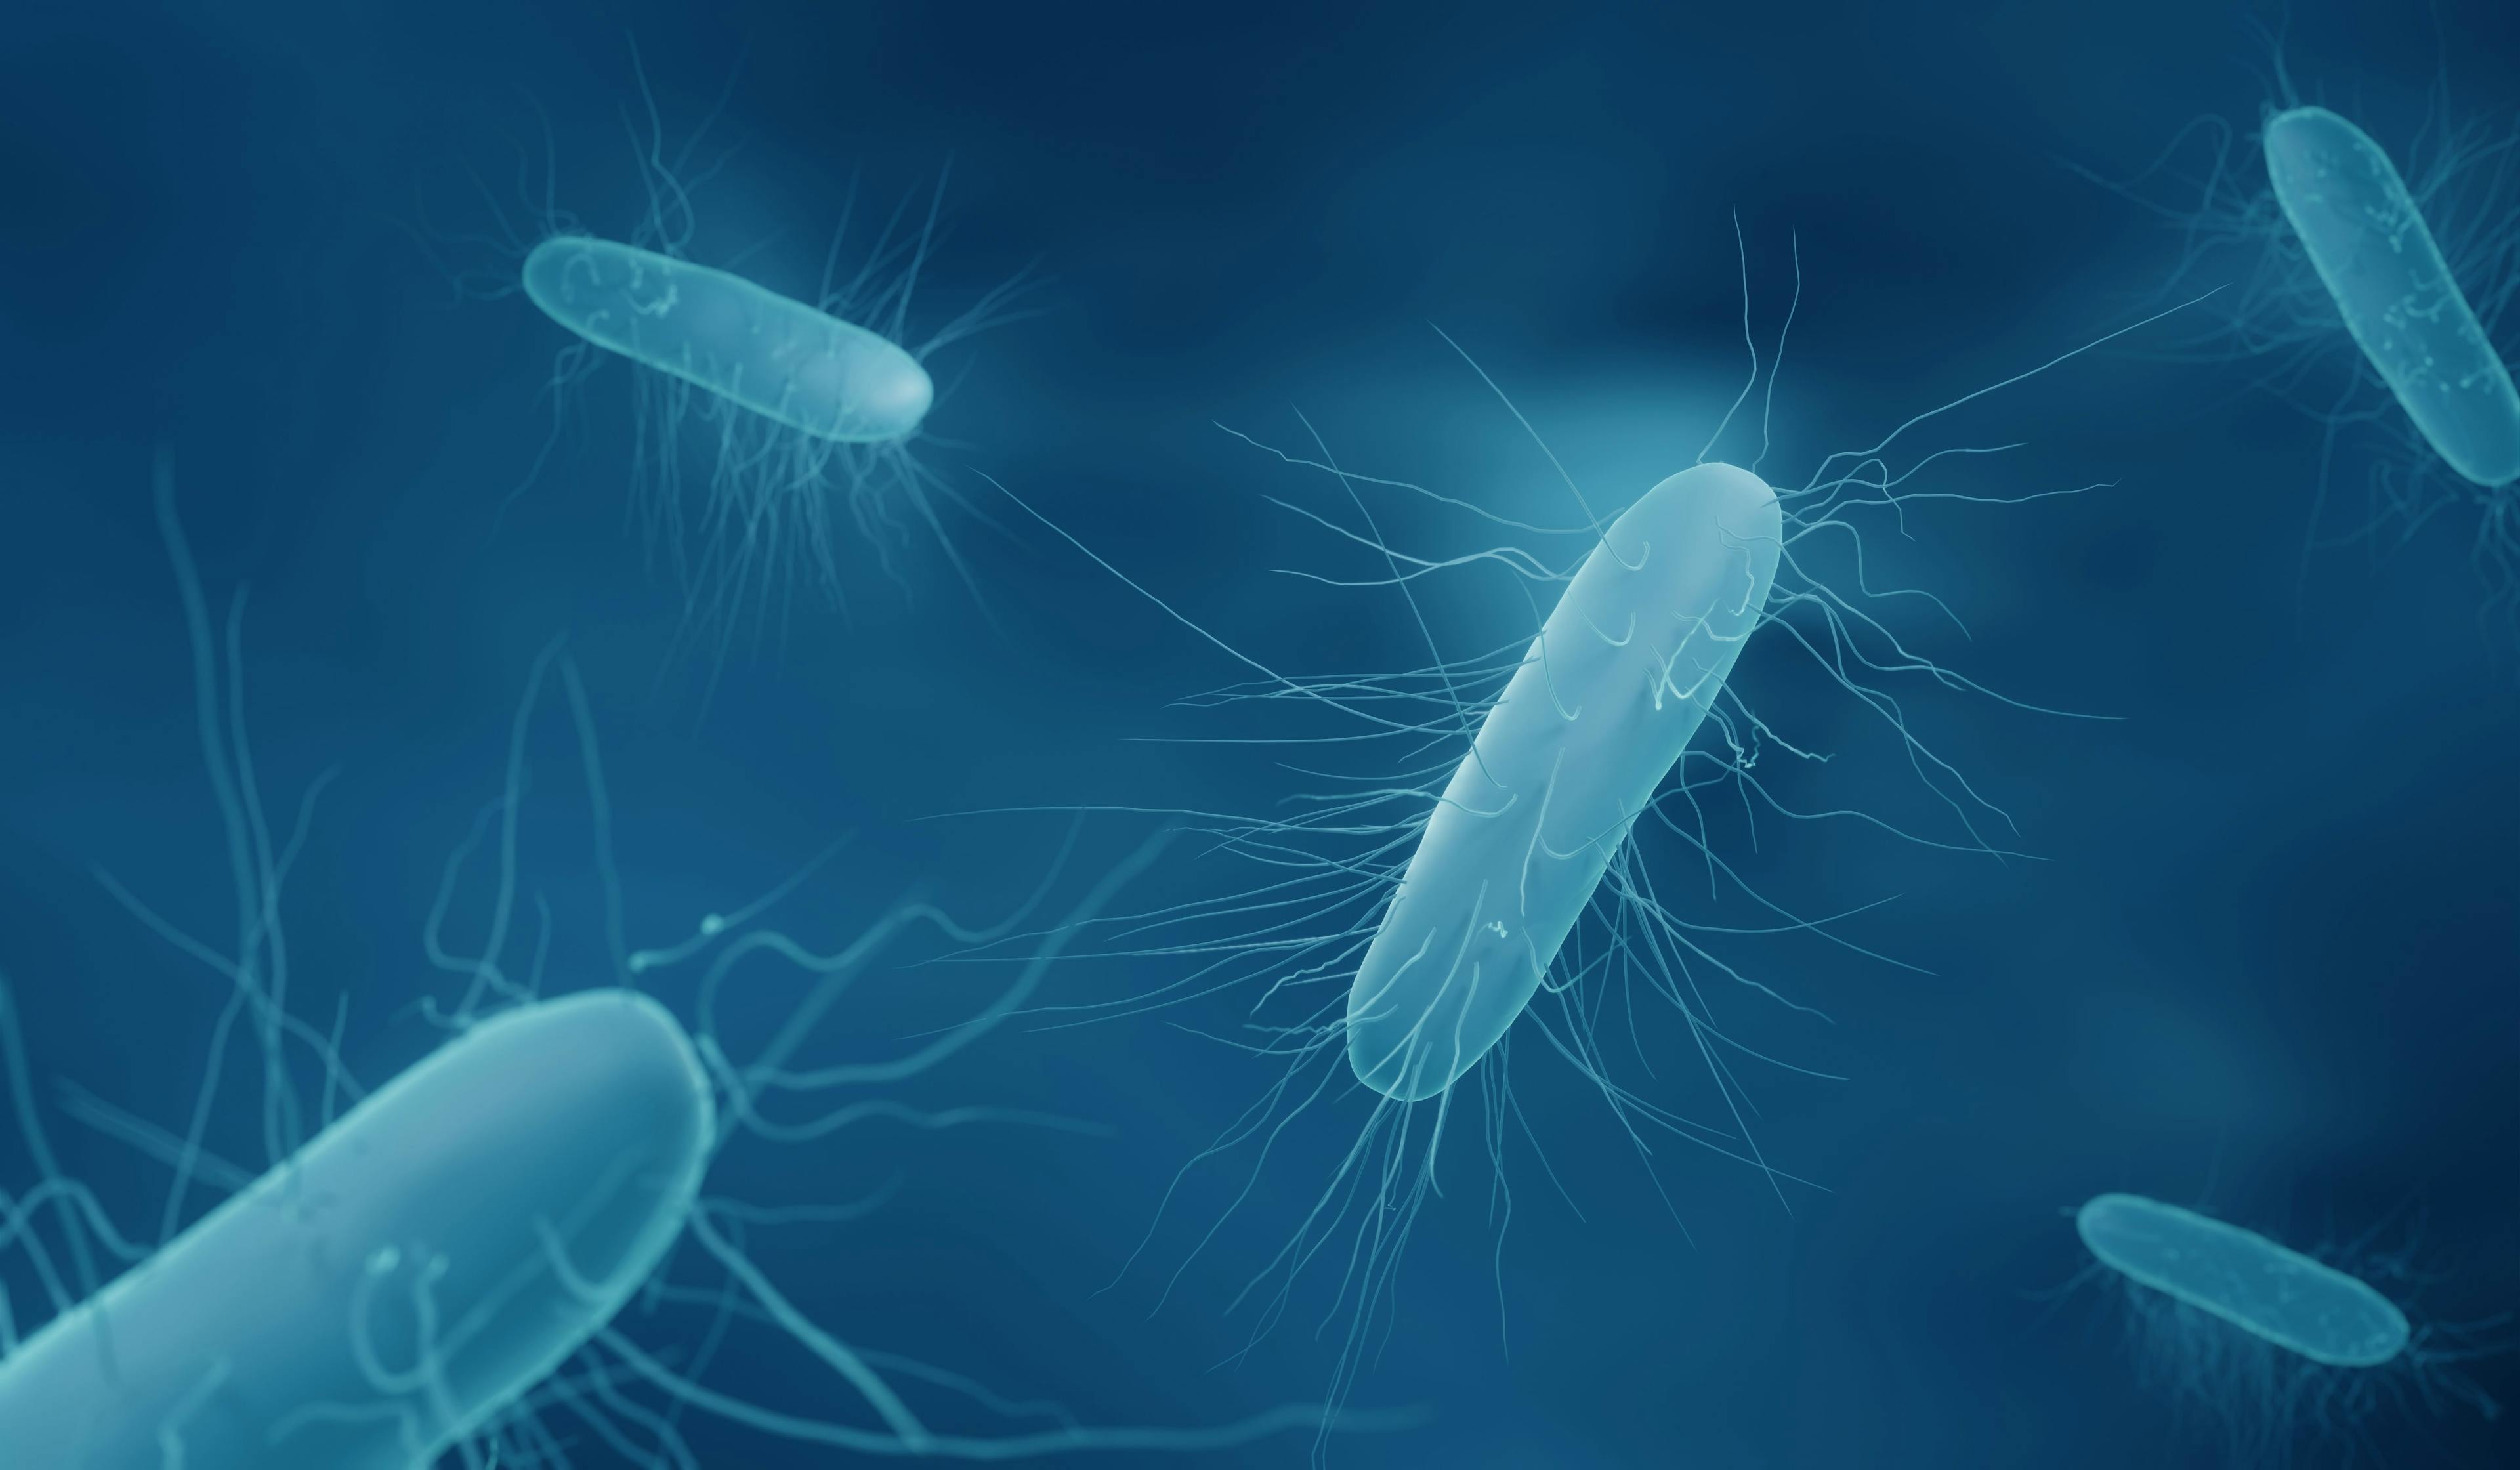 Concomitant antibiotic (CA) use for infection treatment is a major risk factor for recurrent C difficile infection. One SHEA 2022 study examine whether fidaxomicin or vancomycin would be more beneficial for CA patients.